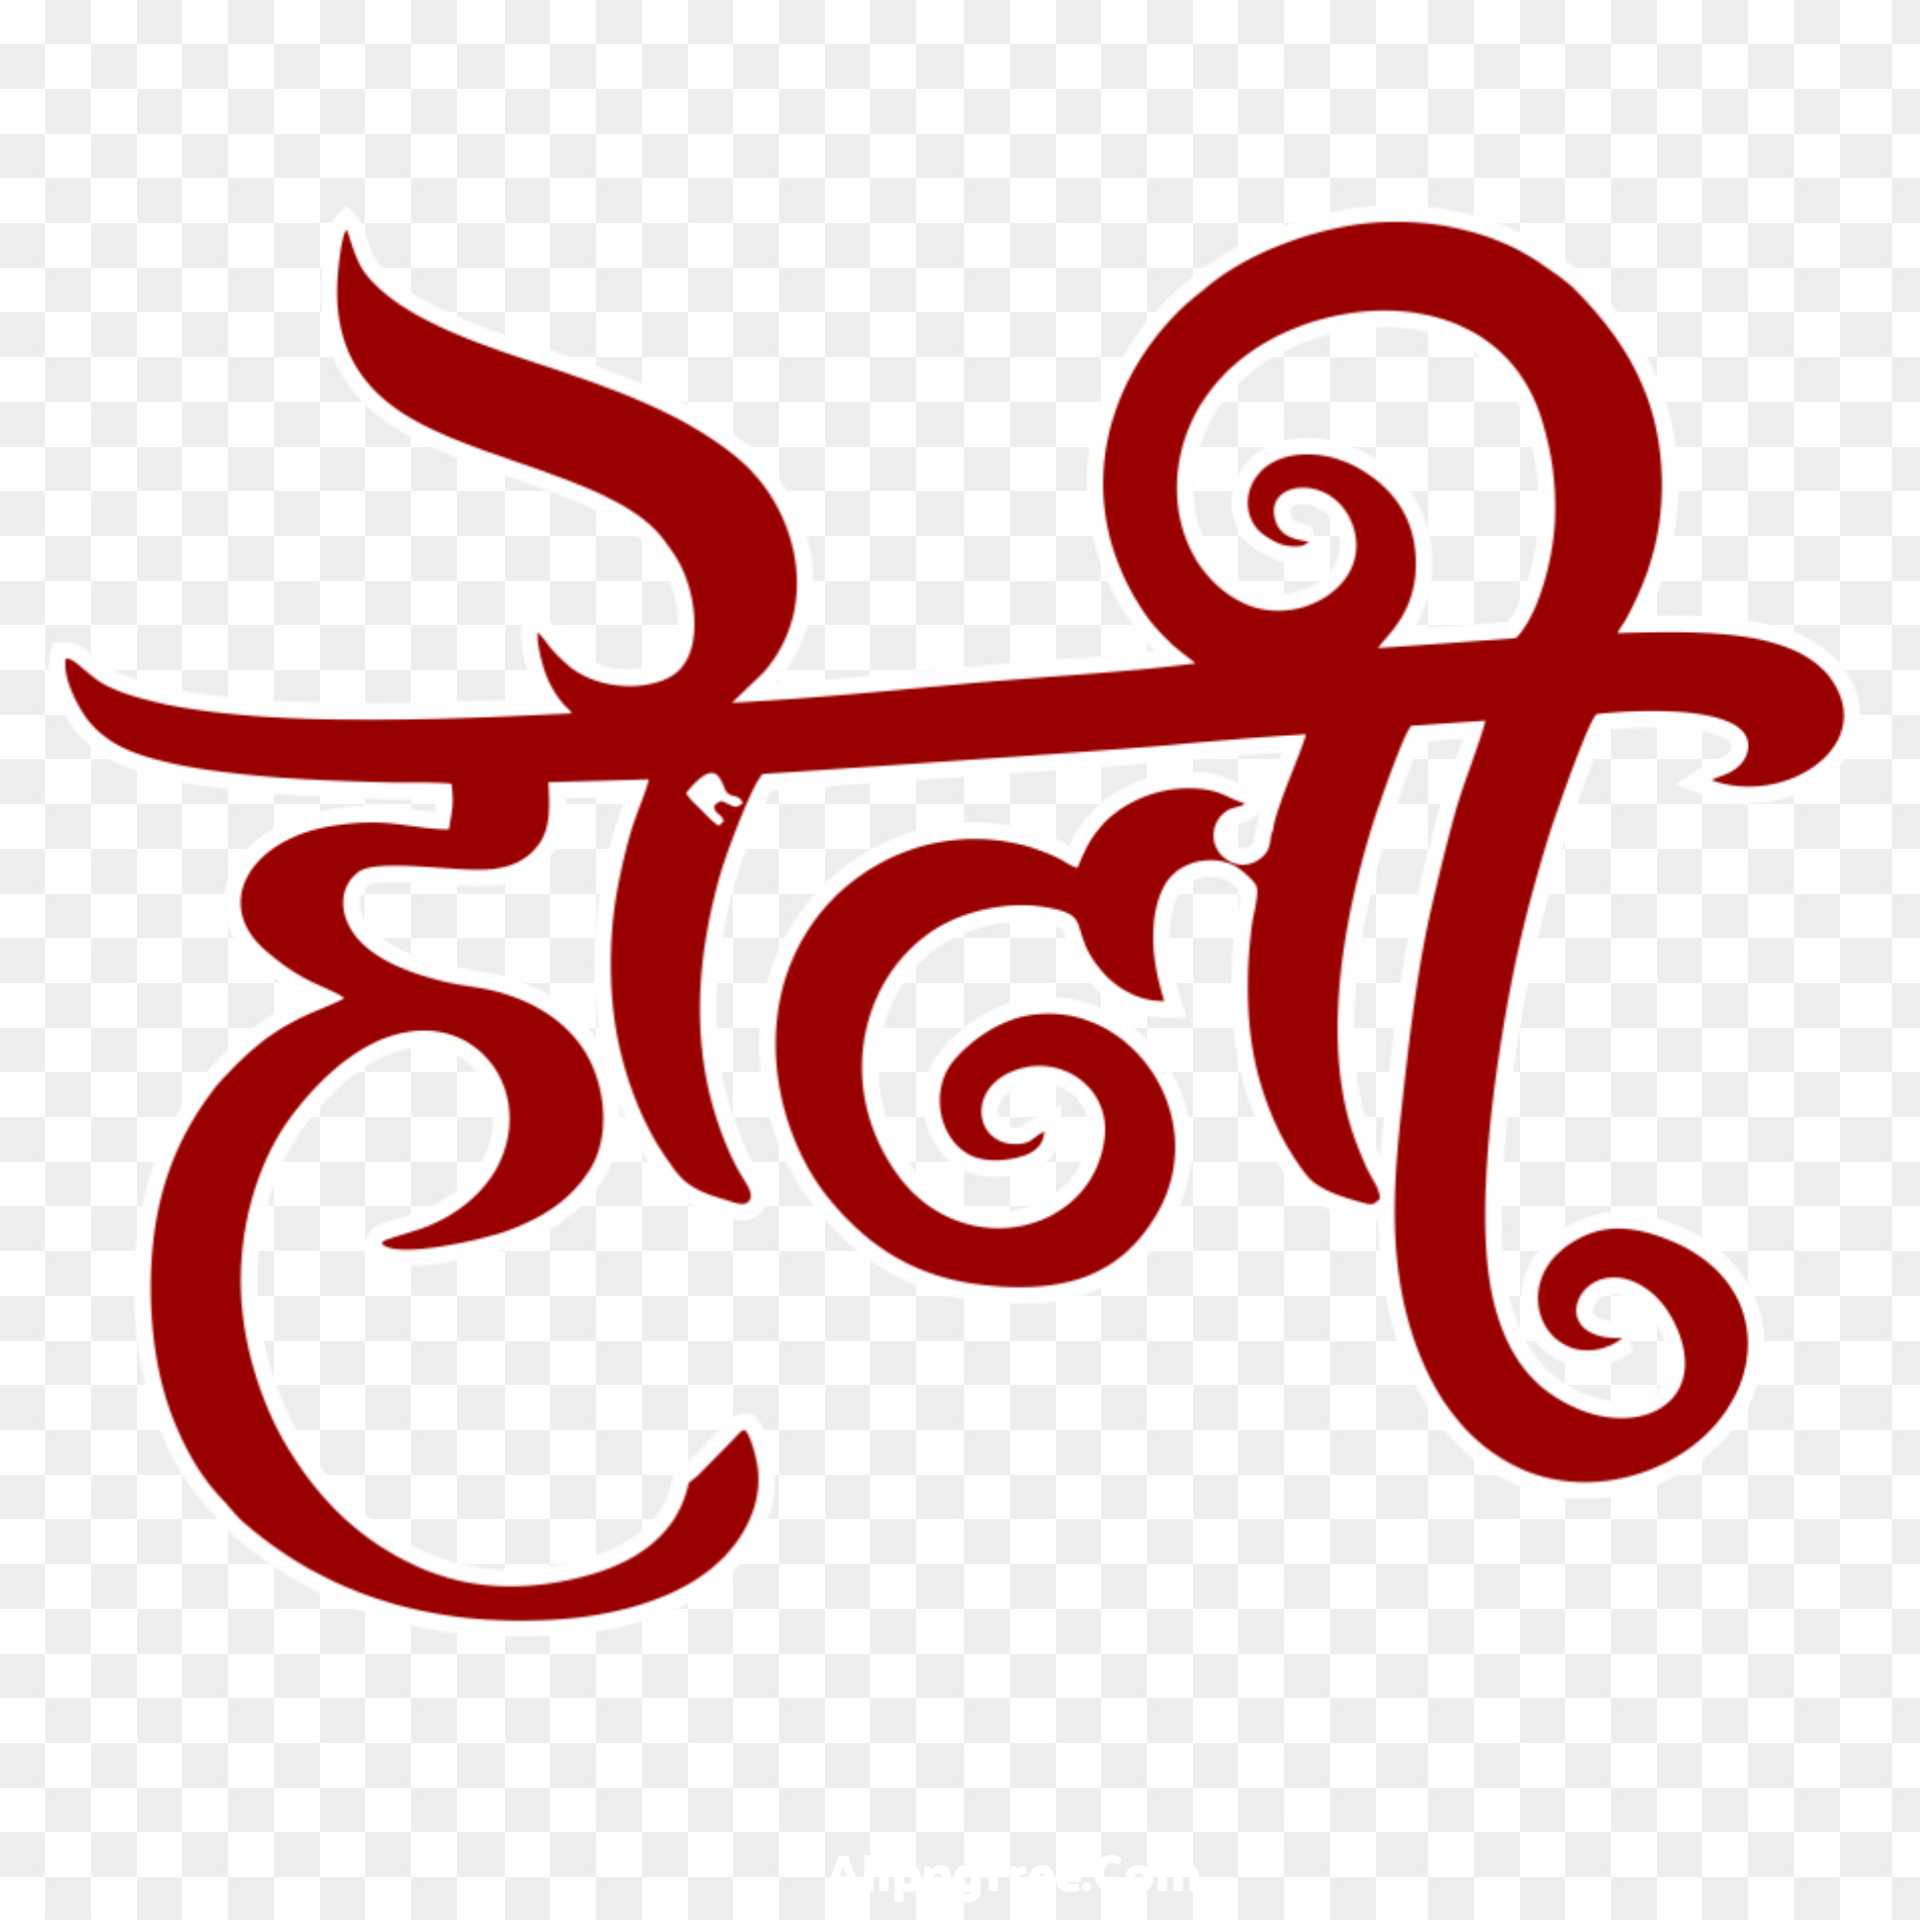 Stylist Holi Hindi text PNG images download